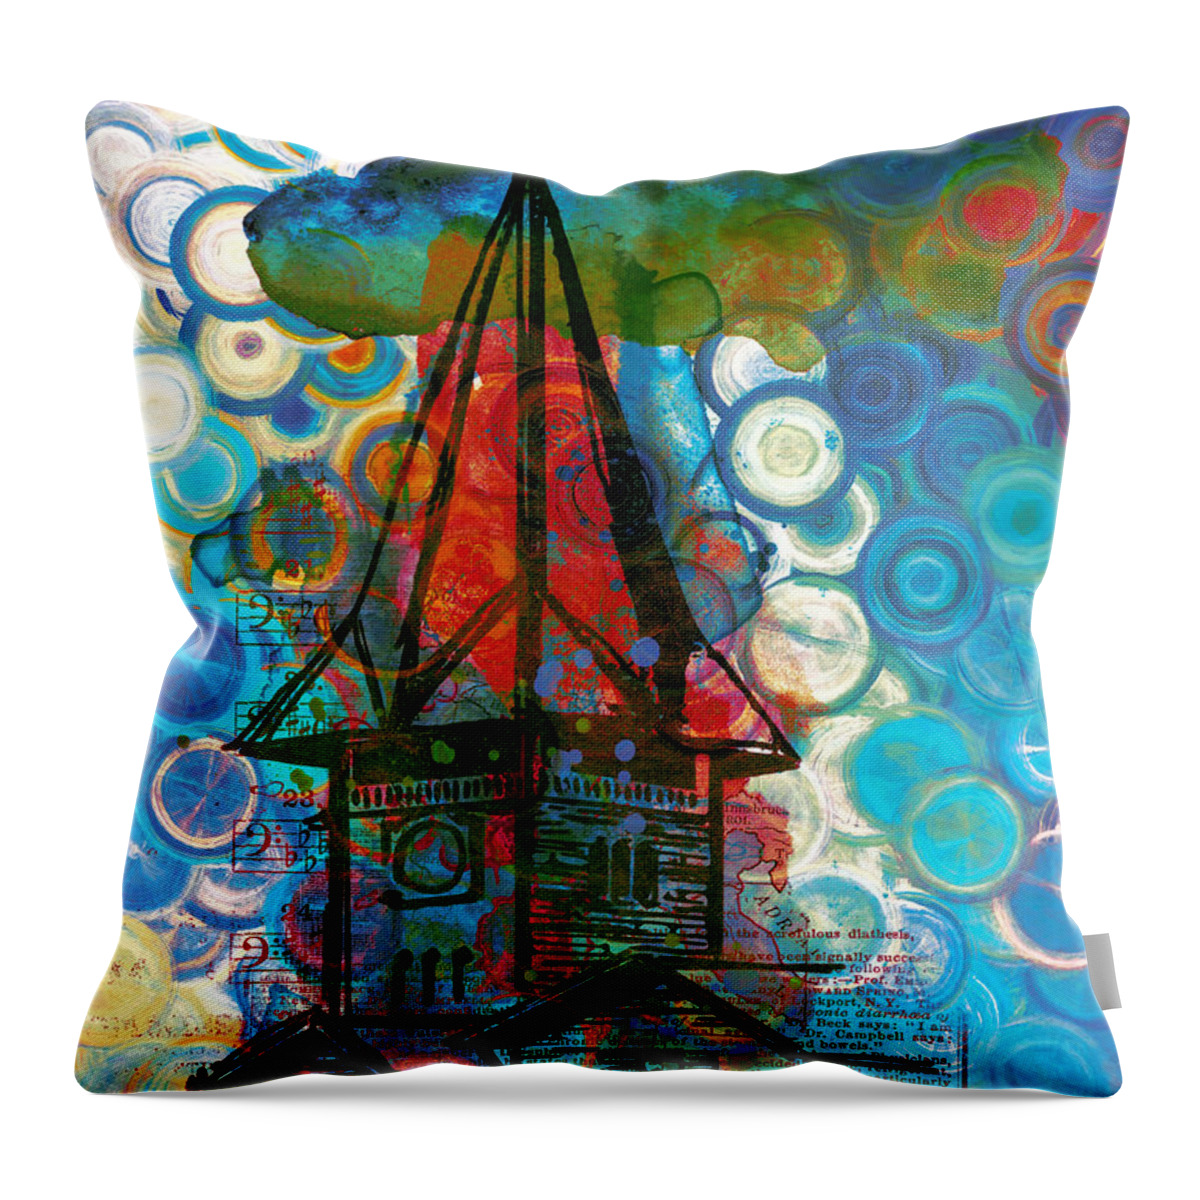 Crazy House In The Clouds Whimsy Throw Pillow featuring the painting Crazy Red House In The Clouds Whimsy by Georgiana Romanovna